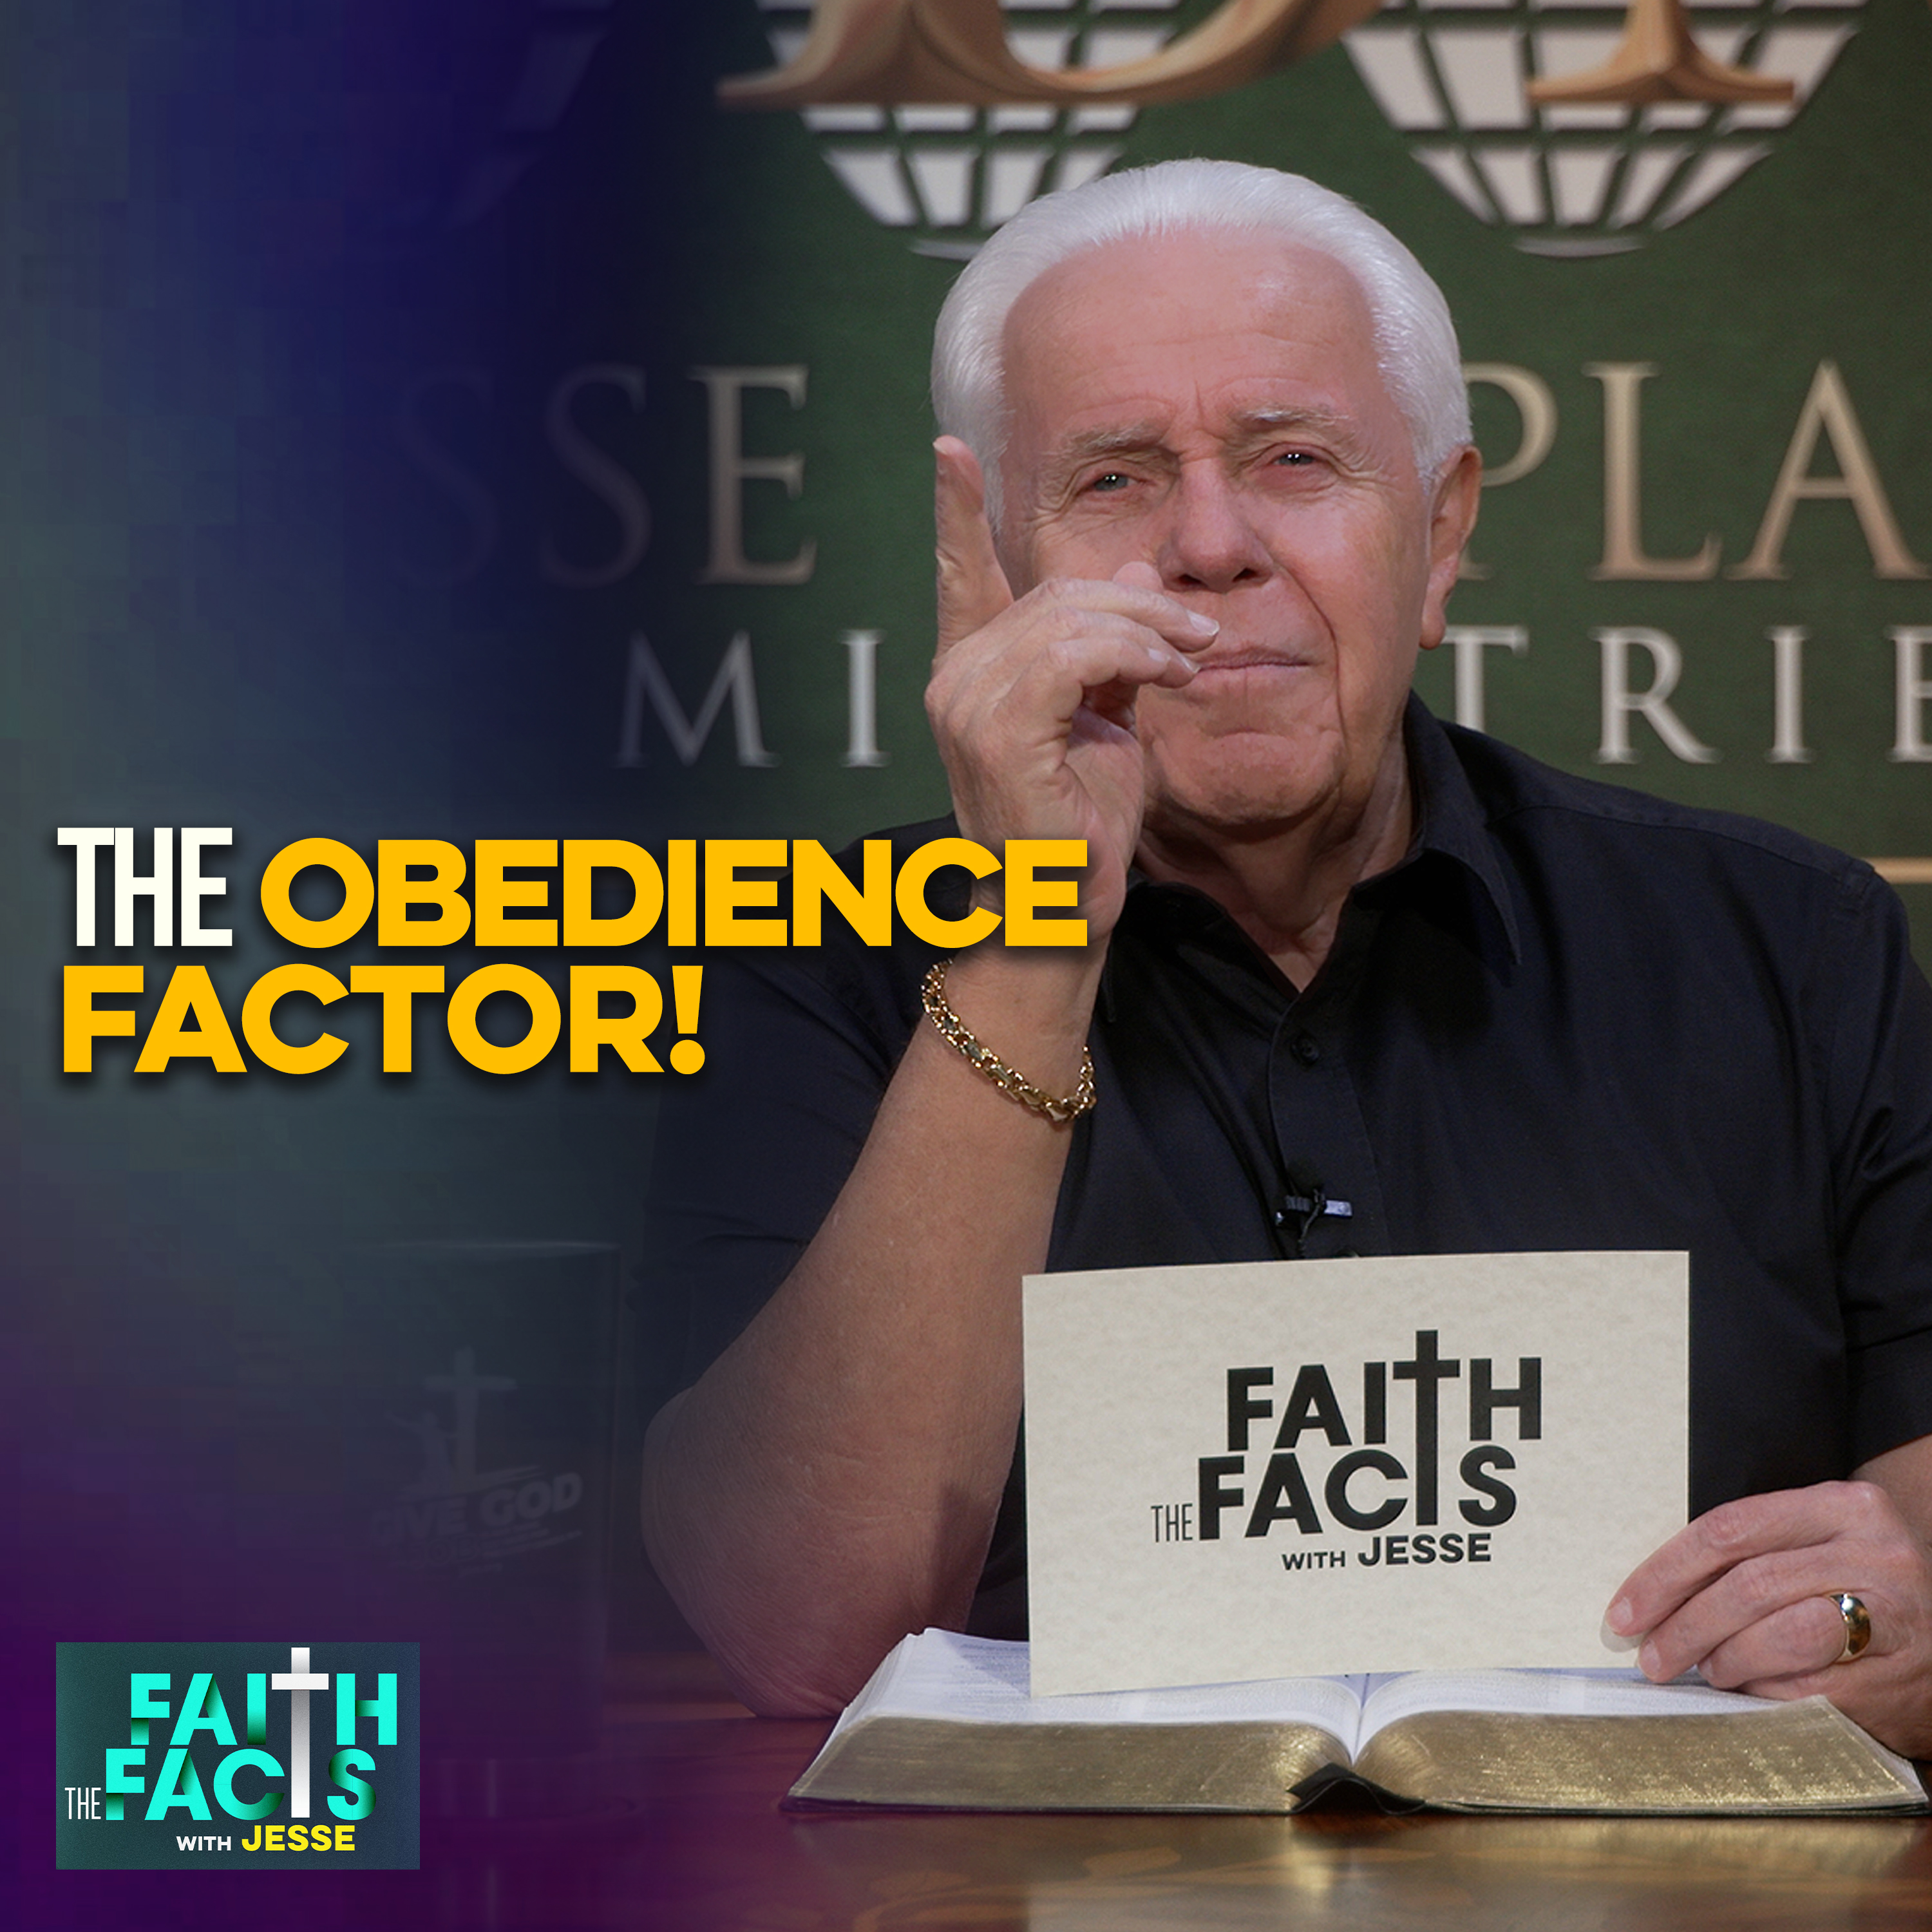 The Obedience Factor!